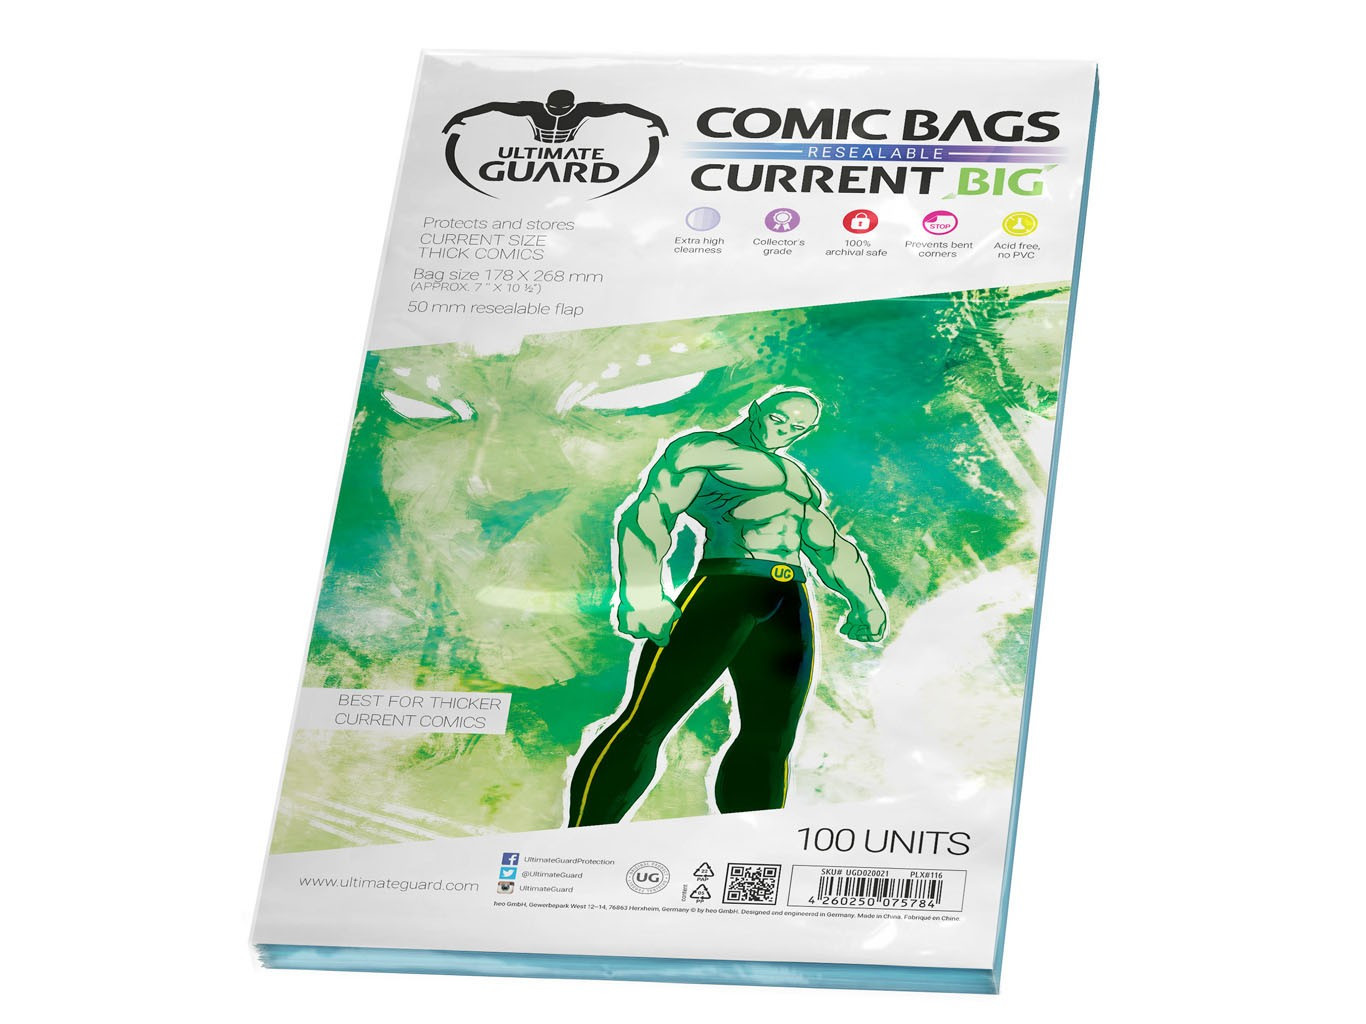 100 Ultimate Guard Comic Bags Current Size